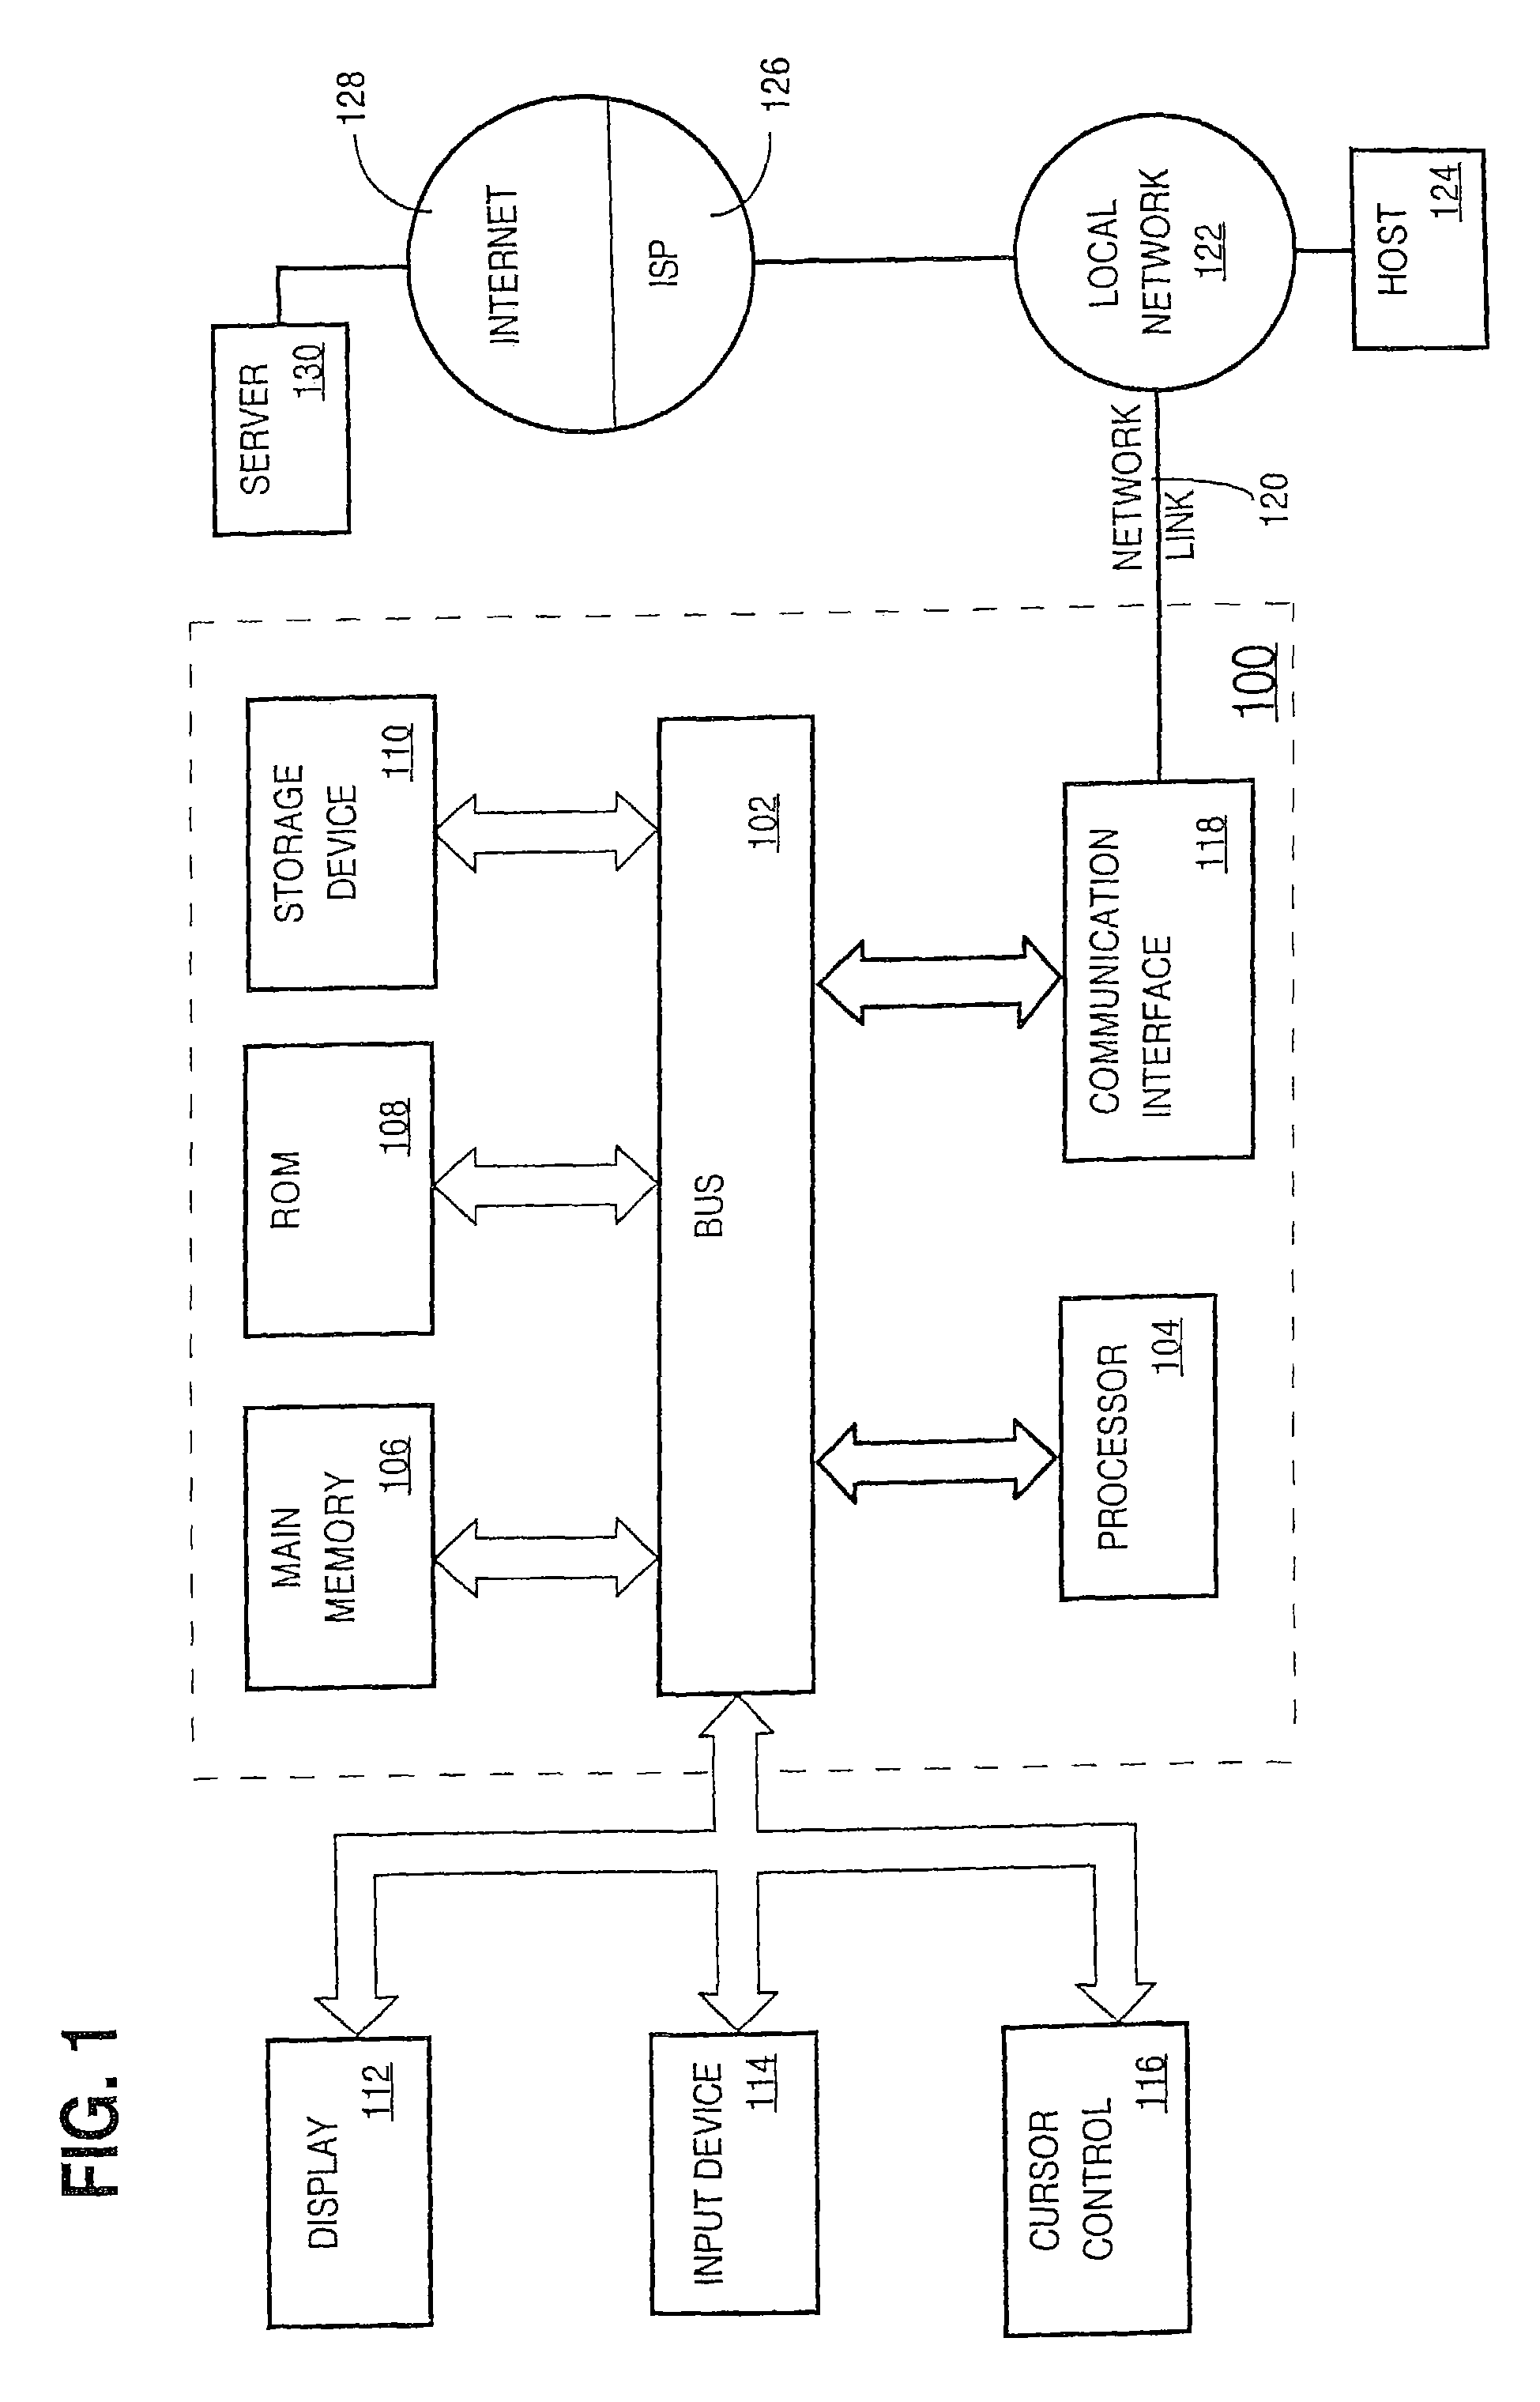 Local authentication of a client at a network device